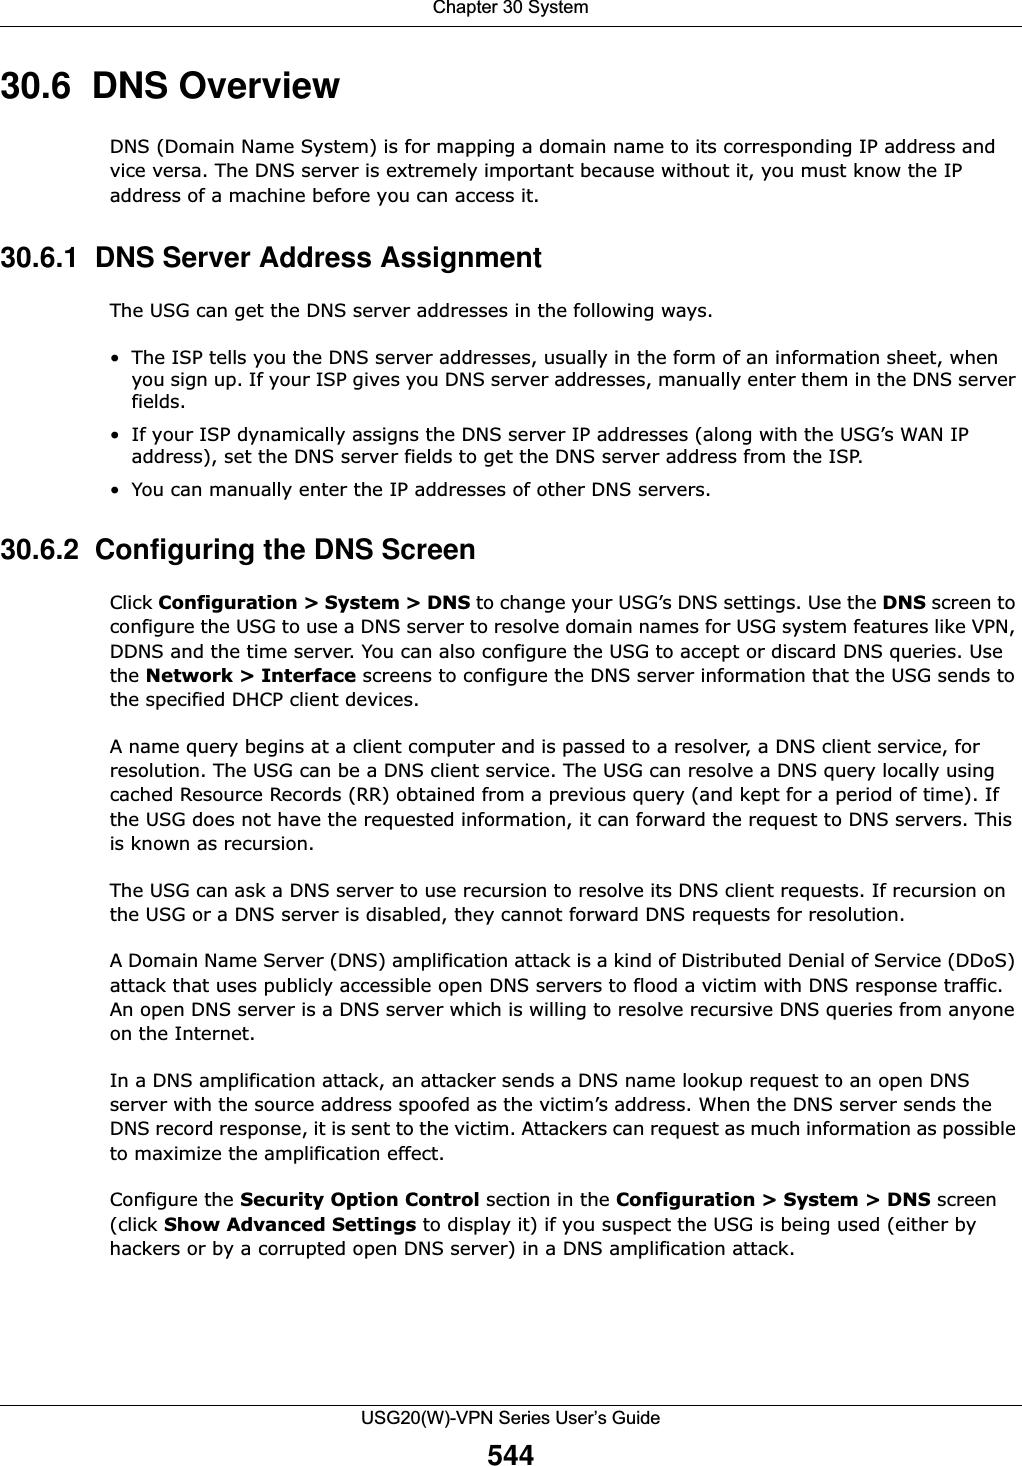 Chapter 30 SystemUSG20(W)-VPN Series User’s Guide54430.6  DNS OverviewDNS (Domain Name System) is for mapping a domain name to its corresponding IP address and vice versa. The DNS server is extremely important because without it, you must know the IP address of a machine before you can access it. 30.6.1  DNS Server Address AssignmentThe USG can get the DNS server addresses in the following ways.• The ISP tells you the DNS server addresses, usually in the form of an information sheet, when you sign up. If your ISP gives you DNS server addresses, manually enter them in the DNS server fields.• If your ISP dynamically assigns the DNS server IP addresses (along with the USG’s WAN IP address), set the DNS server fields to get the DNS server address from the ISP. • You can manually enter the IP addresses of other DNS servers.30.6.2  Configuring the DNS ScreenClick Configuration &gt; System &gt; DNS to change your USG’s DNS settings. Use the DNS screen to configure the USG to use a DNS server to resolve domain names for USG system features like VPN, DDNS and the time server. You can also configure the USG to accept or discard DNS queries. Use the Network &gt; Interface screens to configure the DNS server information that the USG sends to the specified DHCP client devices.A name query begins at a client computer and is passed to a resolver, a DNS client service, for resolution. The USG can be a DNS client service. The USG can resolve a DNS query locally using cached Resource Records (RR) obtained from a previous query (and kept for a period of time). If the USG does not have the requested information, it can forward the request to DNS servers. This is known as recursion.The USG can ask a DNS server to use recursion to resolve its DNS client requests. If recursion on the USG or a DNS server is disabled, they cannot forward DNS requests for resolution.A Domain Name Server (DNS) amplification attack is a kind of Distributed Denial of Service (DDoS) attack that uses publicly accessible open DNS servers to flood a victim with DNS response traffic. An open DNS server is a DNS server which is willing to resolve recursive DNS queries from anyone on the Internet.In a DNS amplification attack, an attacker sends a DNS name lookup request to an open DNS server with the source address spoofed as the victim’s address. When the DNS server sends the DNS record response, it is sent to the victim. Attackers can request as much information as possible to maximize the amplification effect. Configure the Security Option Control section in the Configuration &gt; System &gt; DNS screen (click Show Advanced Settings to display it) if you suspect the USG is being used (either by hackers or by a corrupted open DNS server) in a DNS amplification attack. 